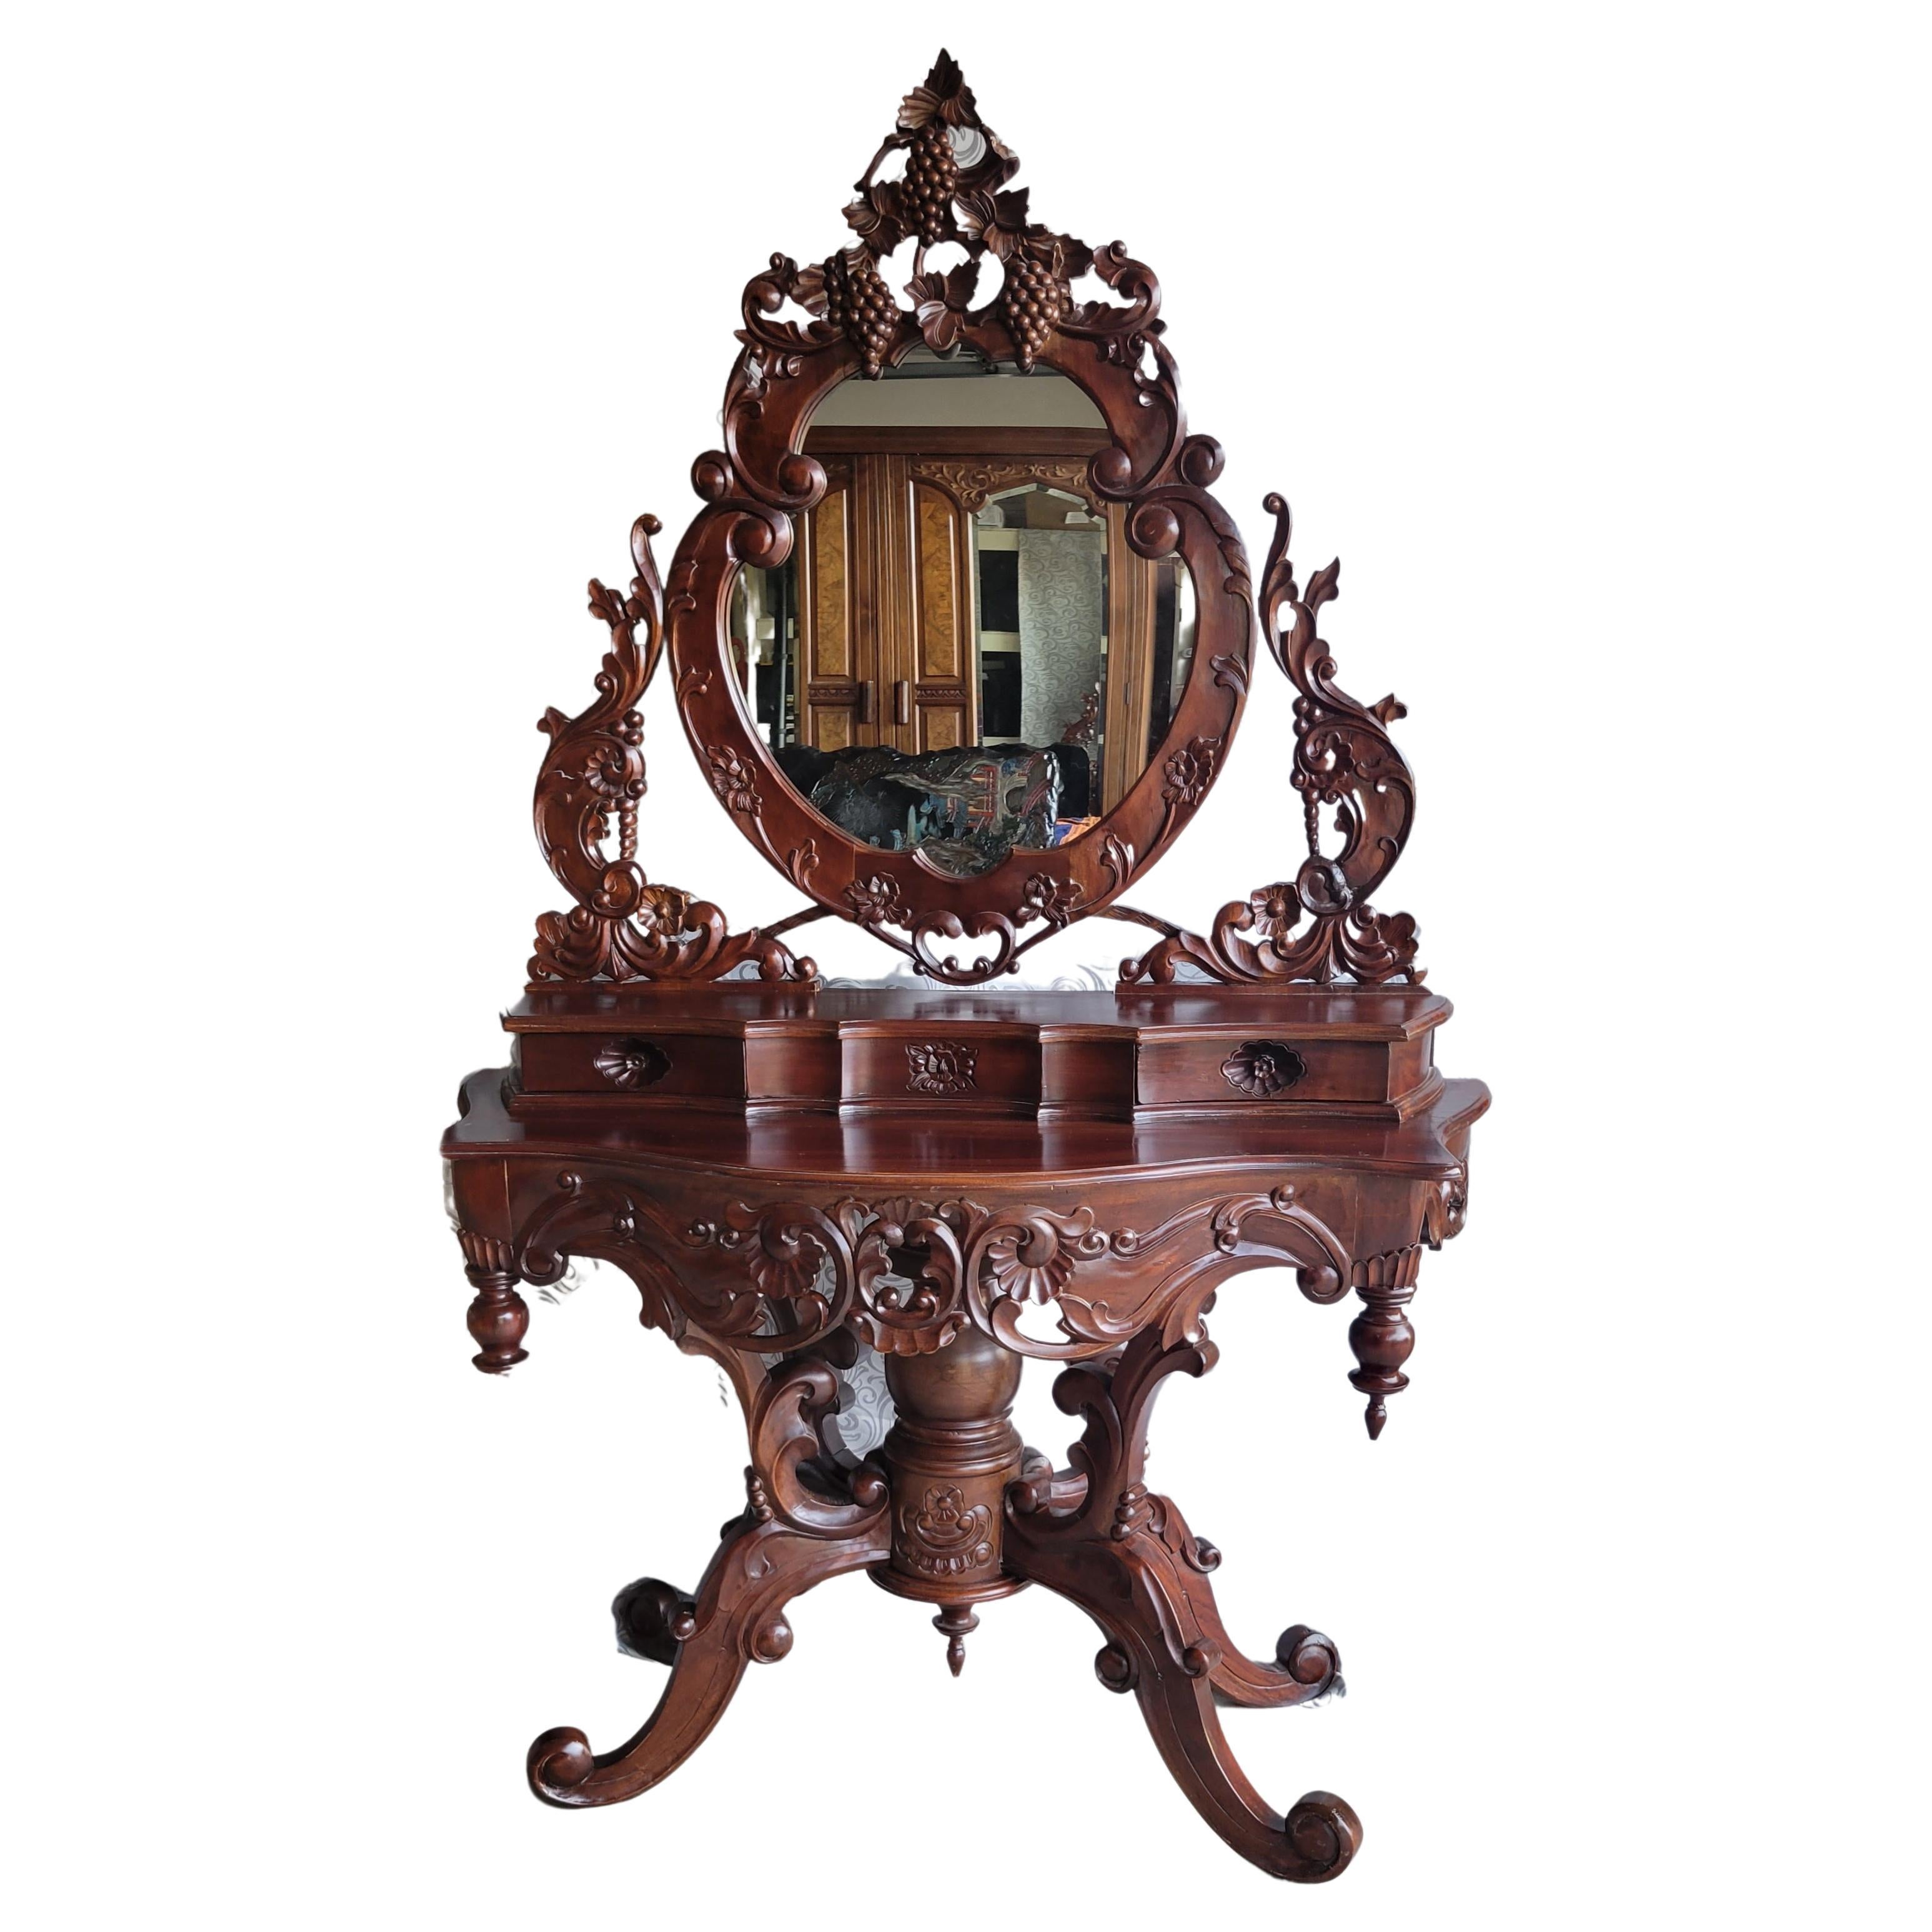 Antique Gothic Hand-Carved Vanity with Two Drawers and Attached Mirror